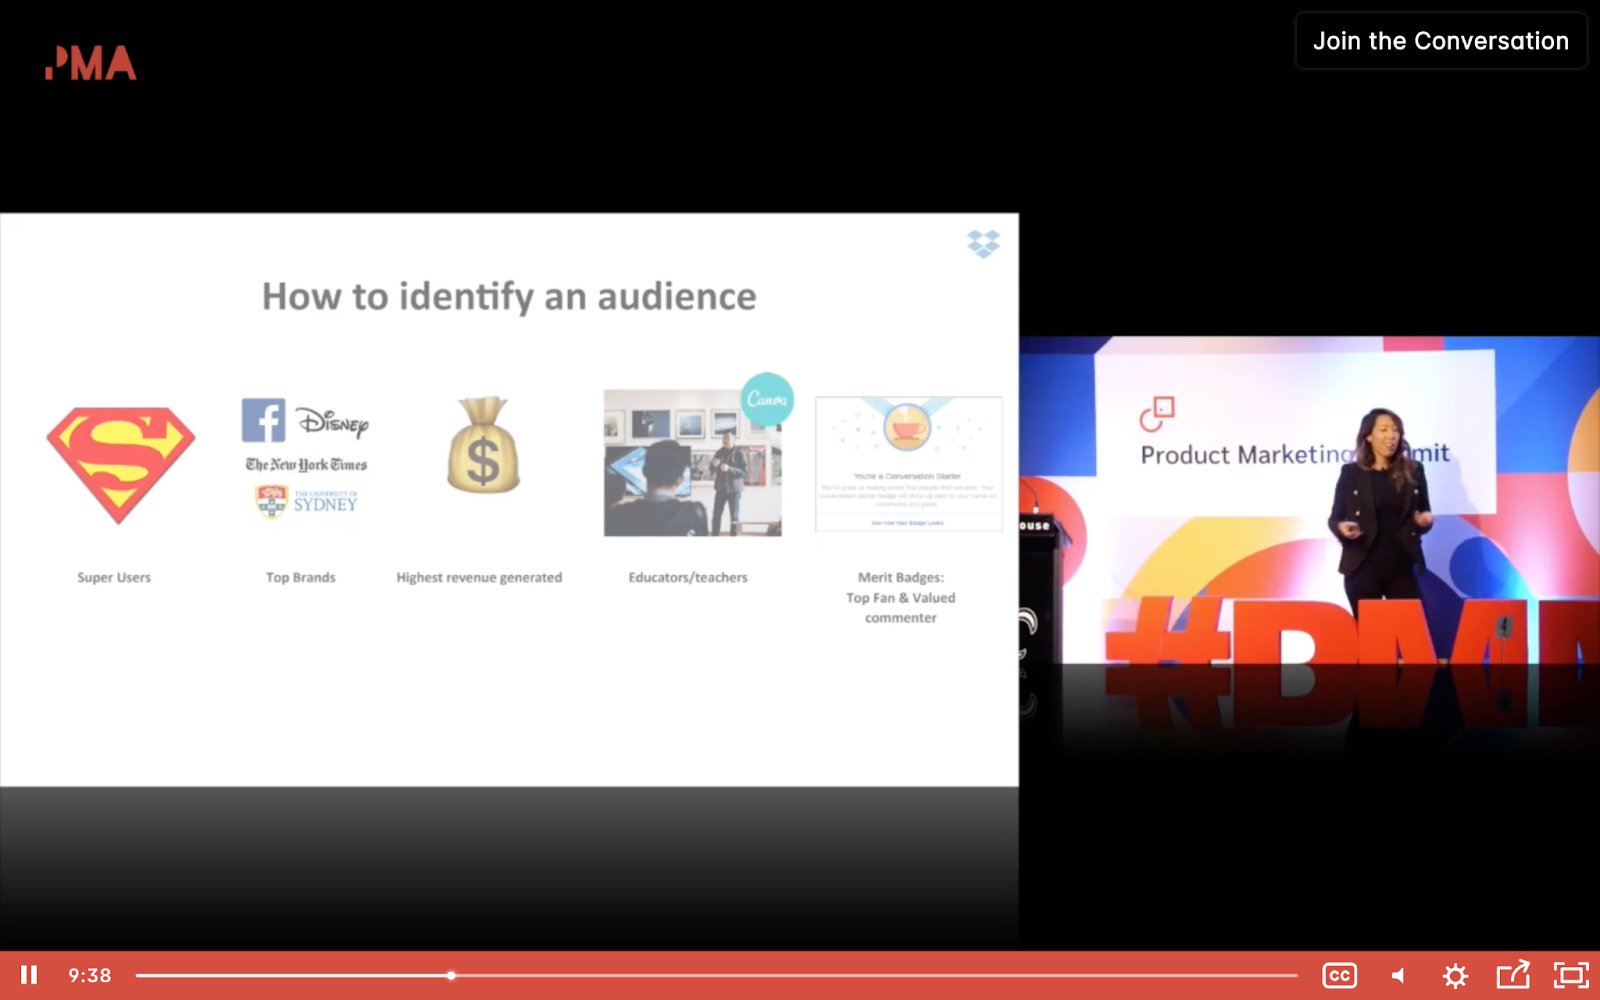 How to identify an audience - super users, top brands, highest revenue generated, education/trachers, and merit badges - top fan and valued commenter. 